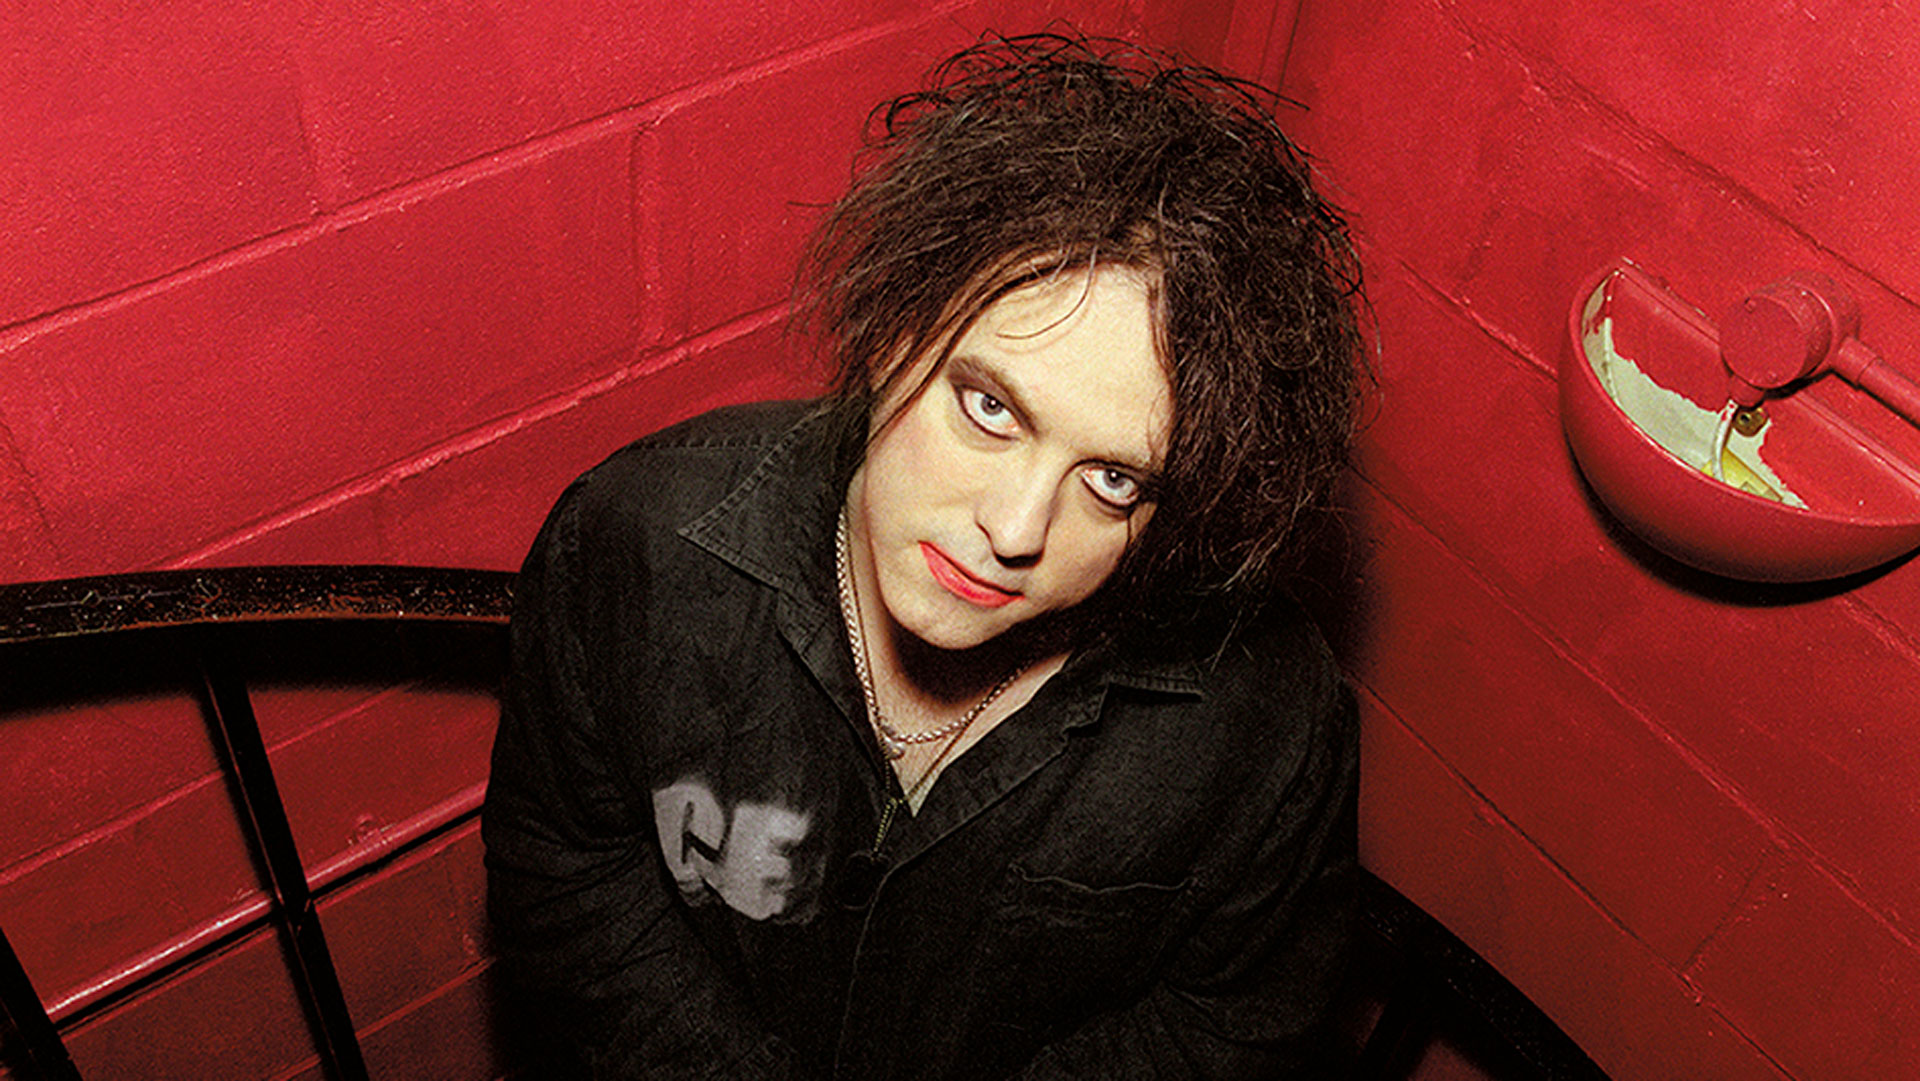 Robert Smith isn't people's perceptions': Stories behind classic